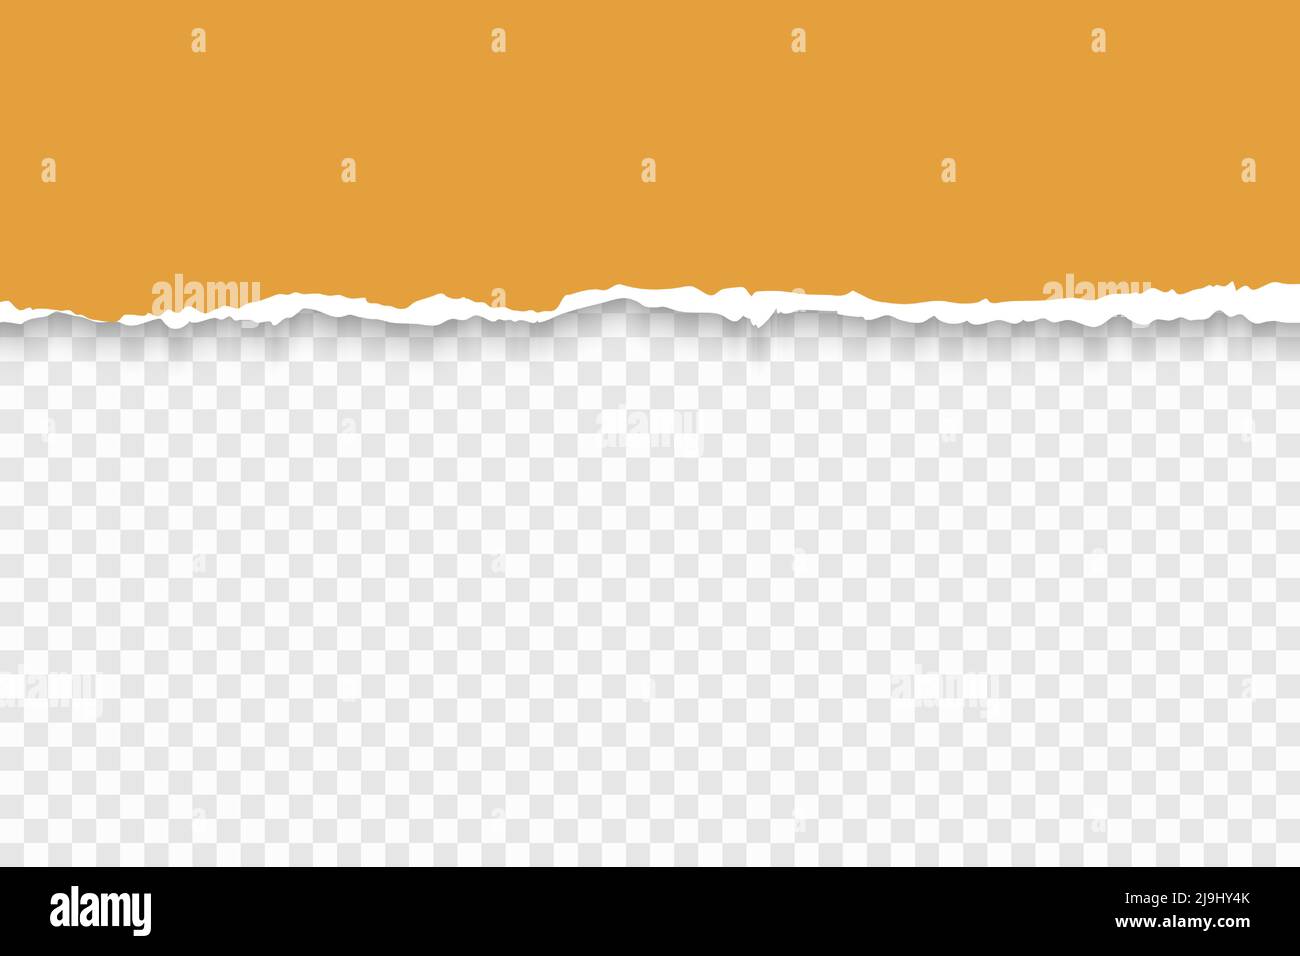 Torn paper header. Realistic vector illustration of orange torn paper with ripper edges and soft shadow on transparent background Stock Vector